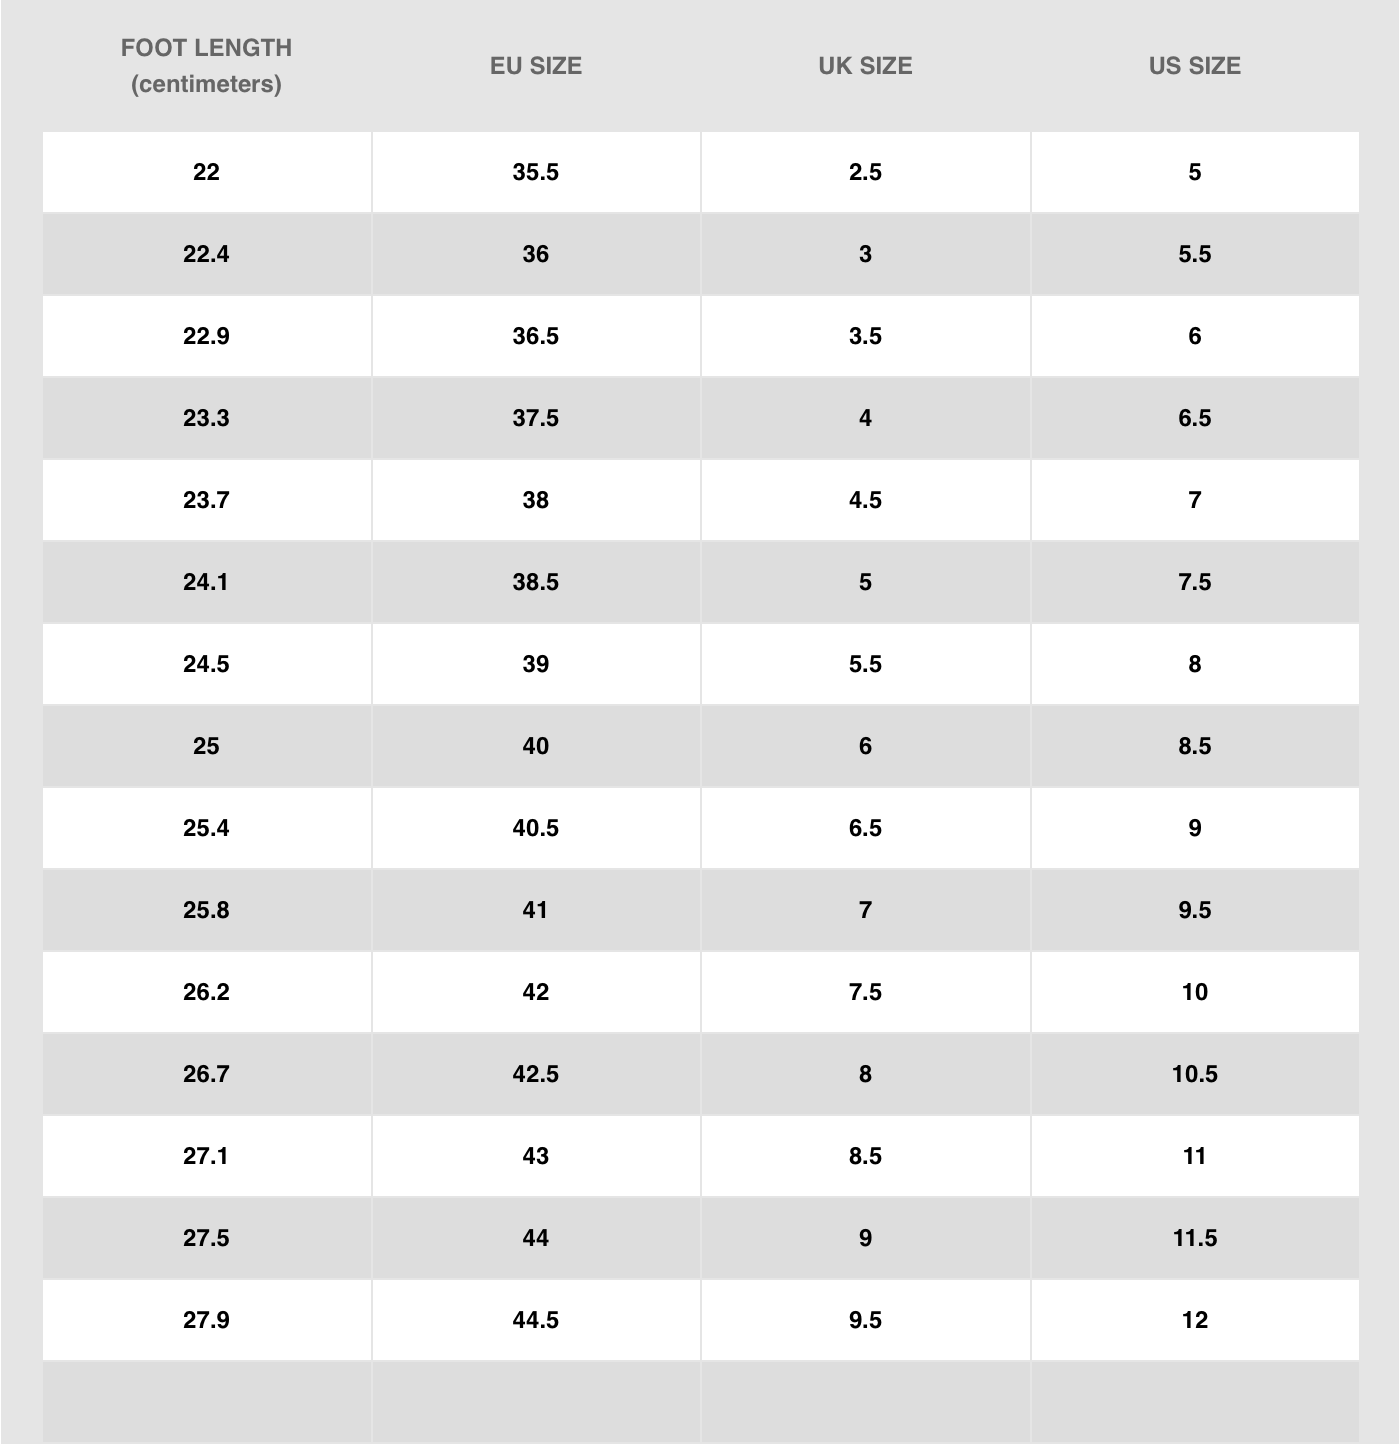 nike men's sizes compared to women's